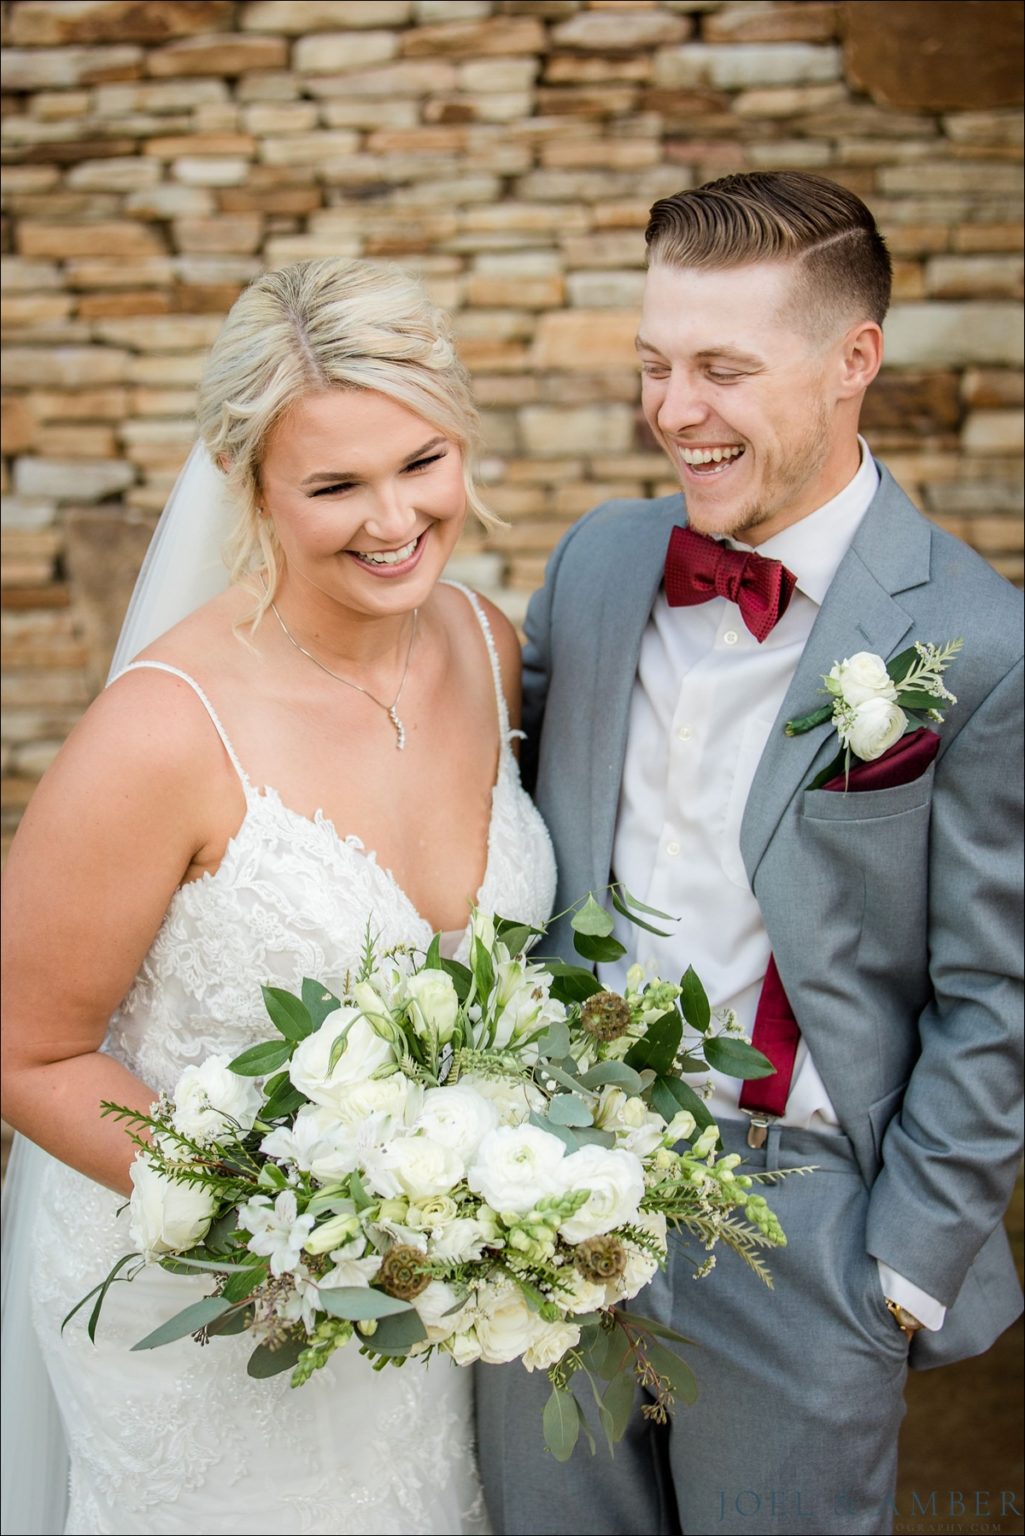 Best of 2021: Wedding Portraits | Joel and Amber Photography